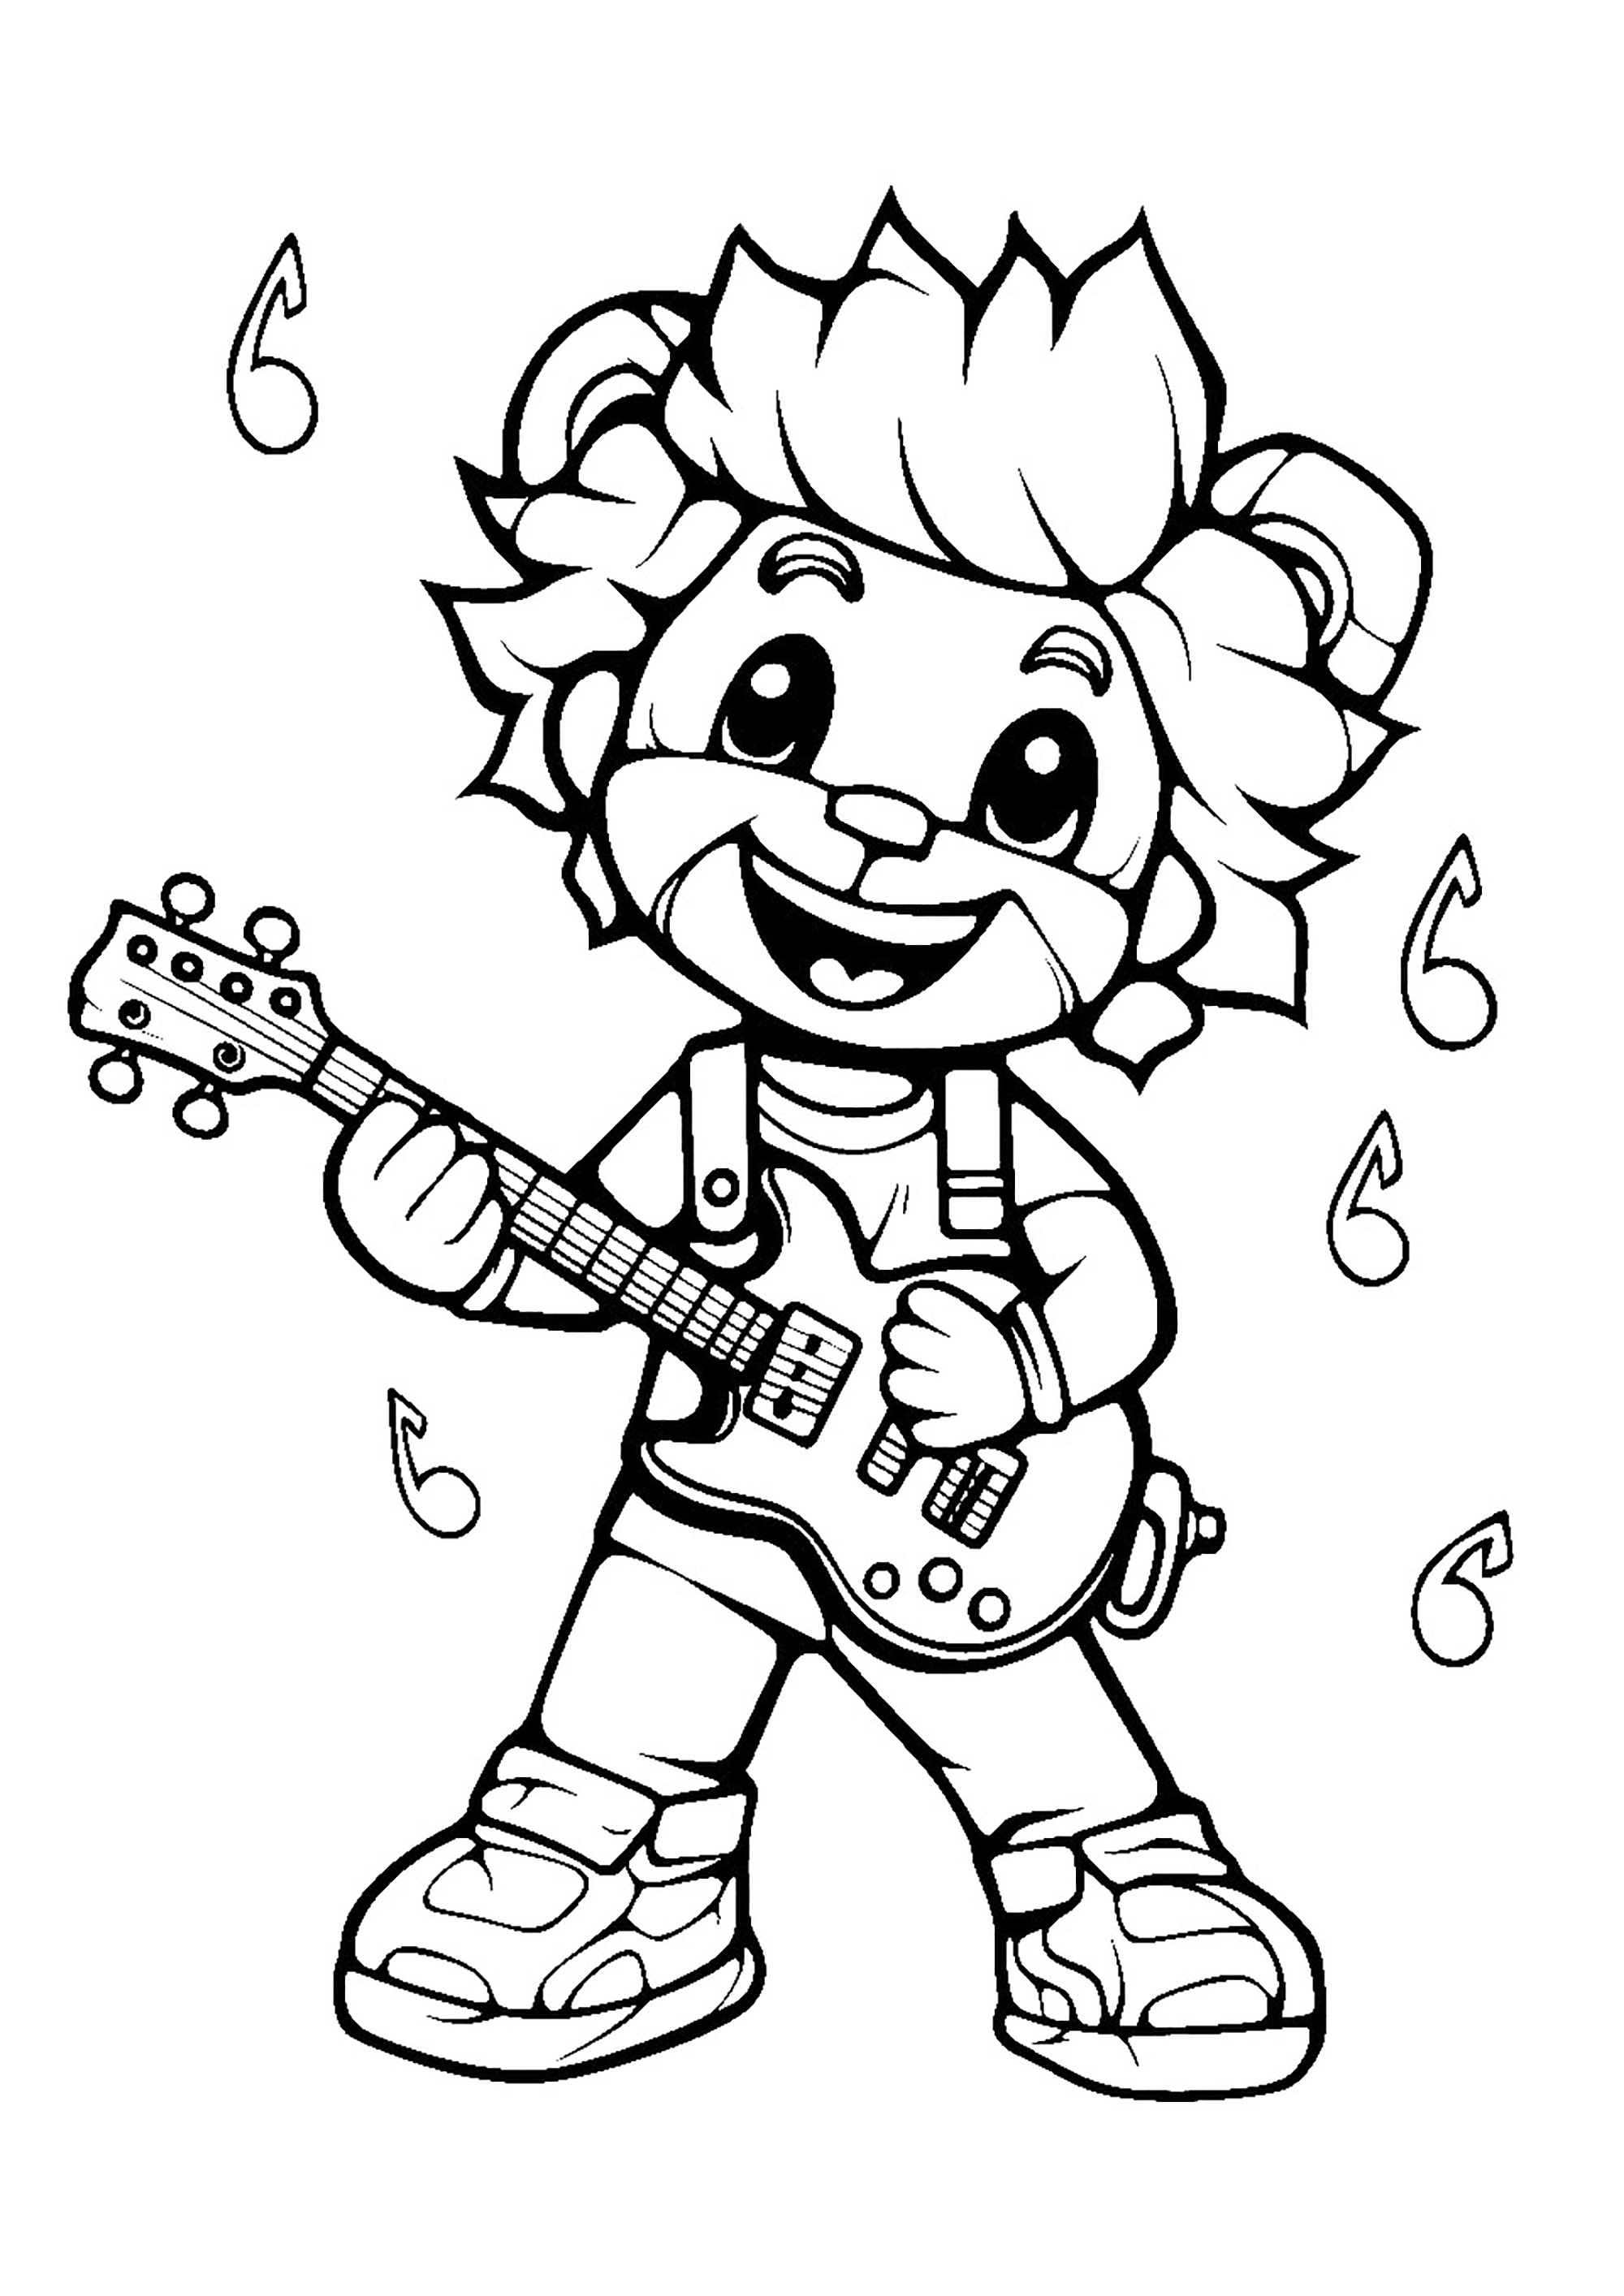 Lion on guitar (inspired by FNAF characters)